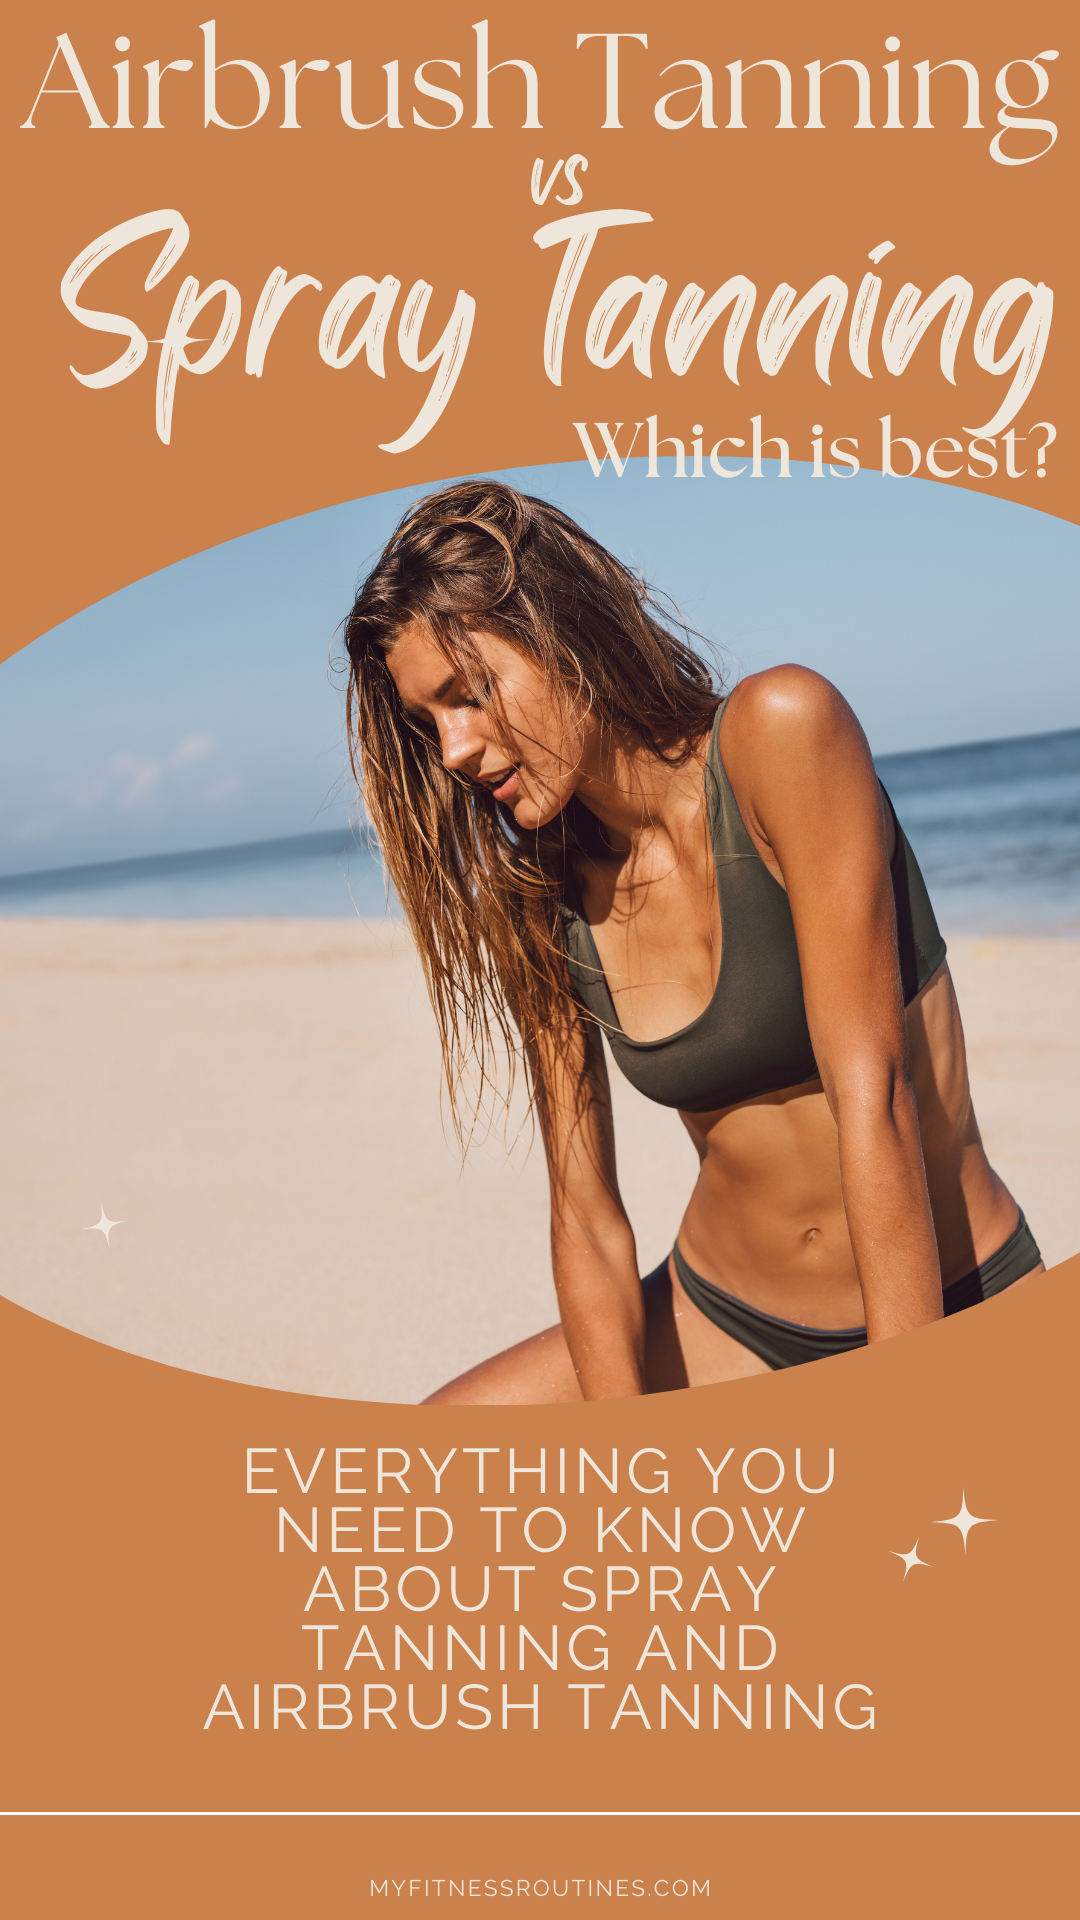 Airbrush Tanning Vs Spray Tanning Which Is Best?